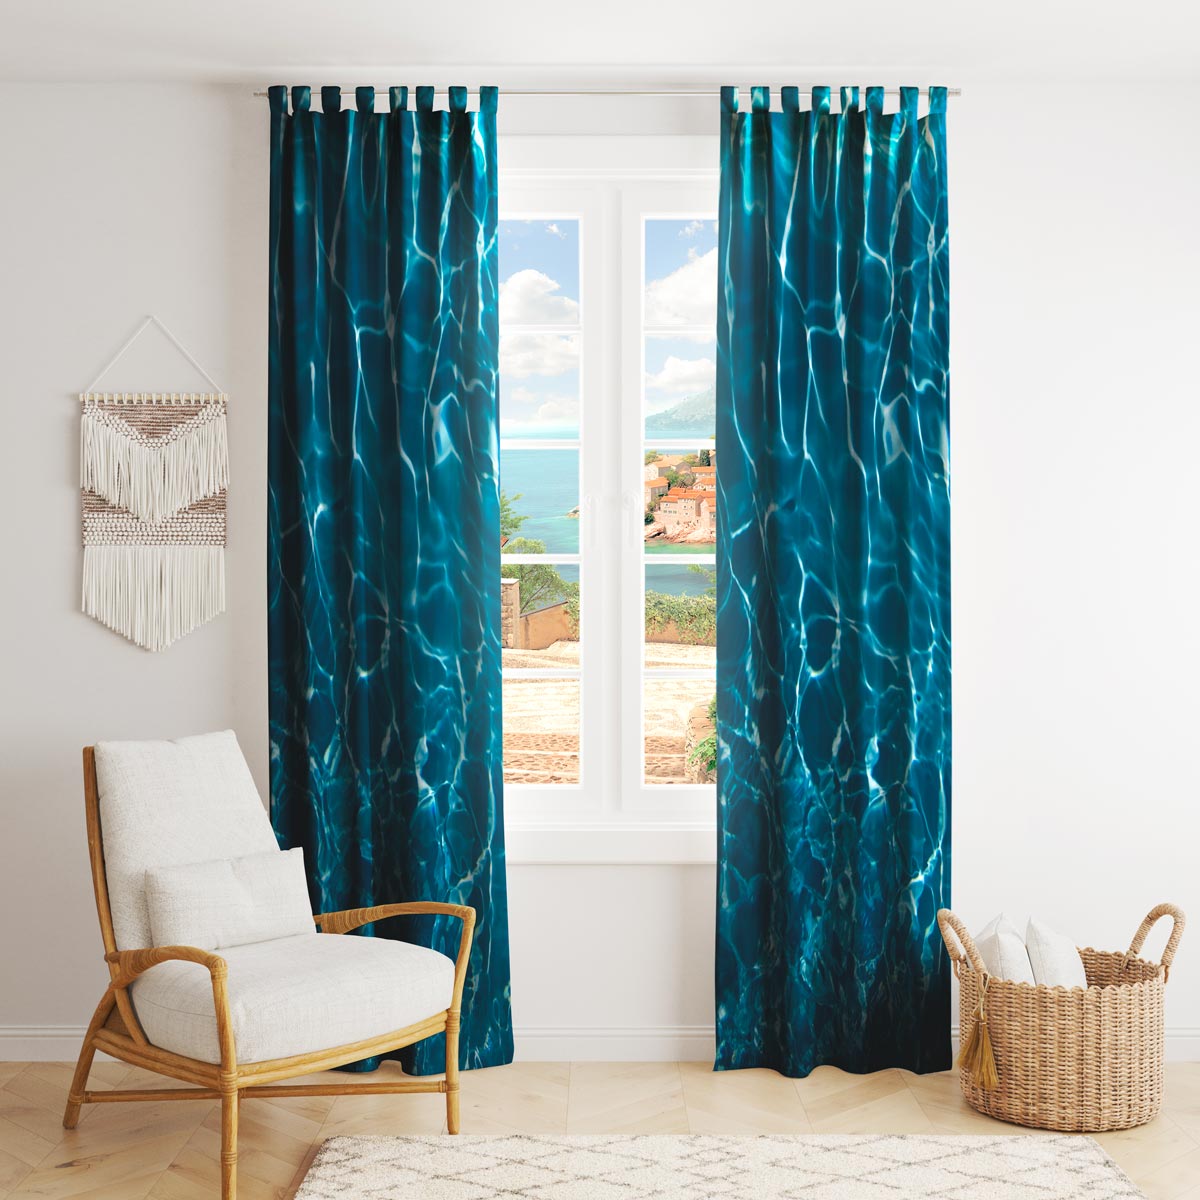 Seletti X Courthouse Exclusive ‘Water’ Velvet Panel Curtain